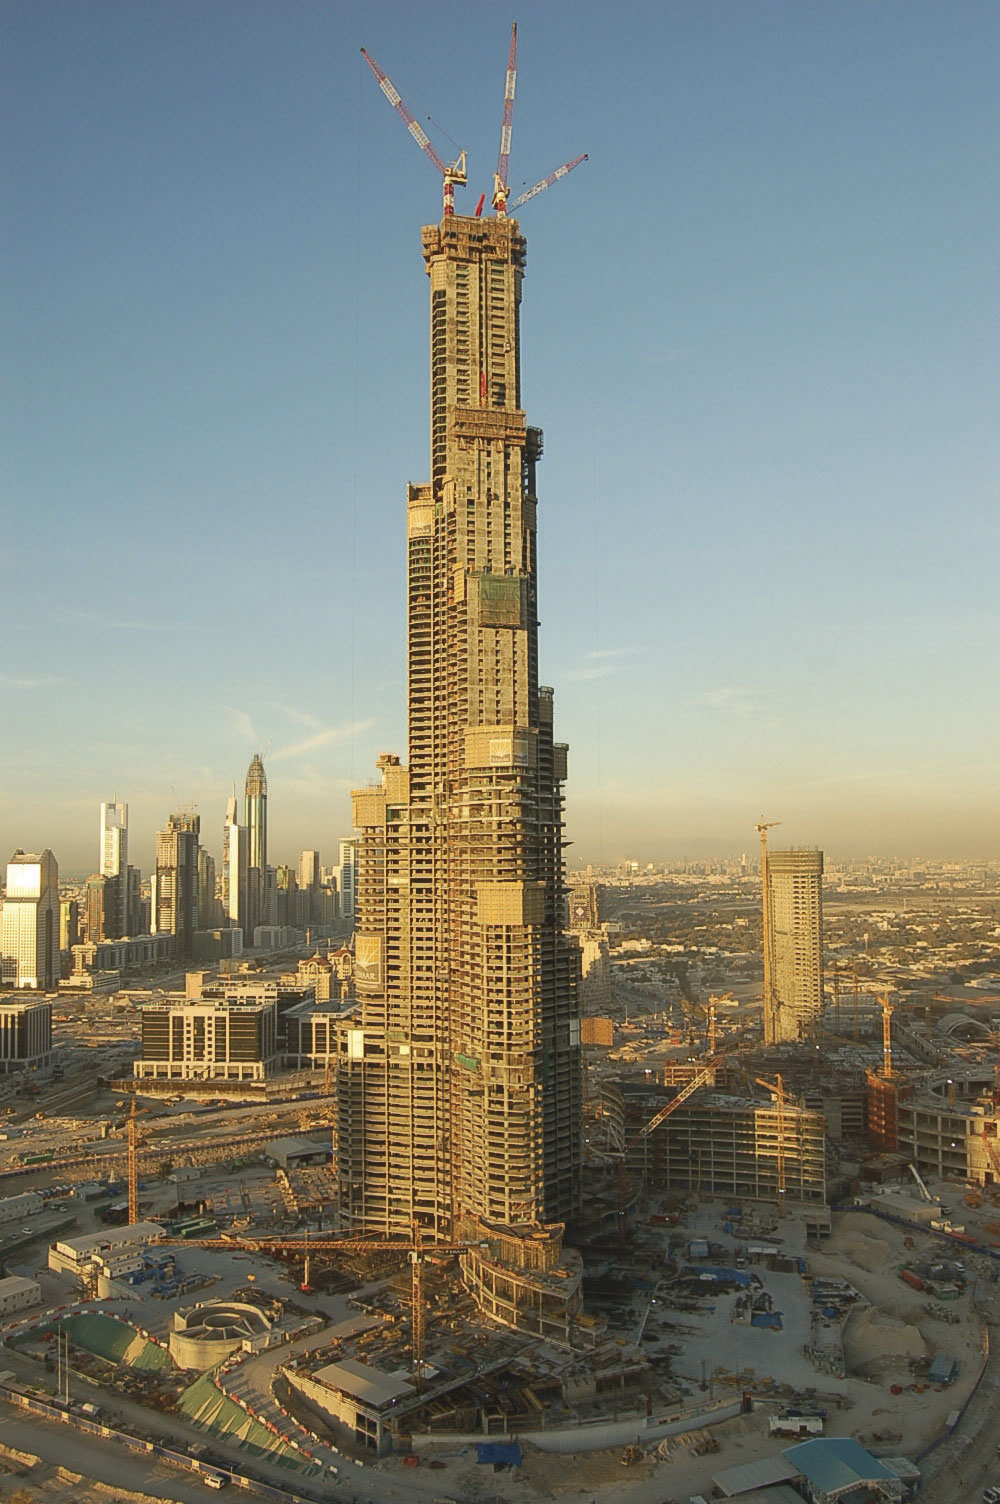 Image 1. At 828 meters, the Burj Khalifa is the world's tallest man-made tower. (Images courtesy of Putzmeister.